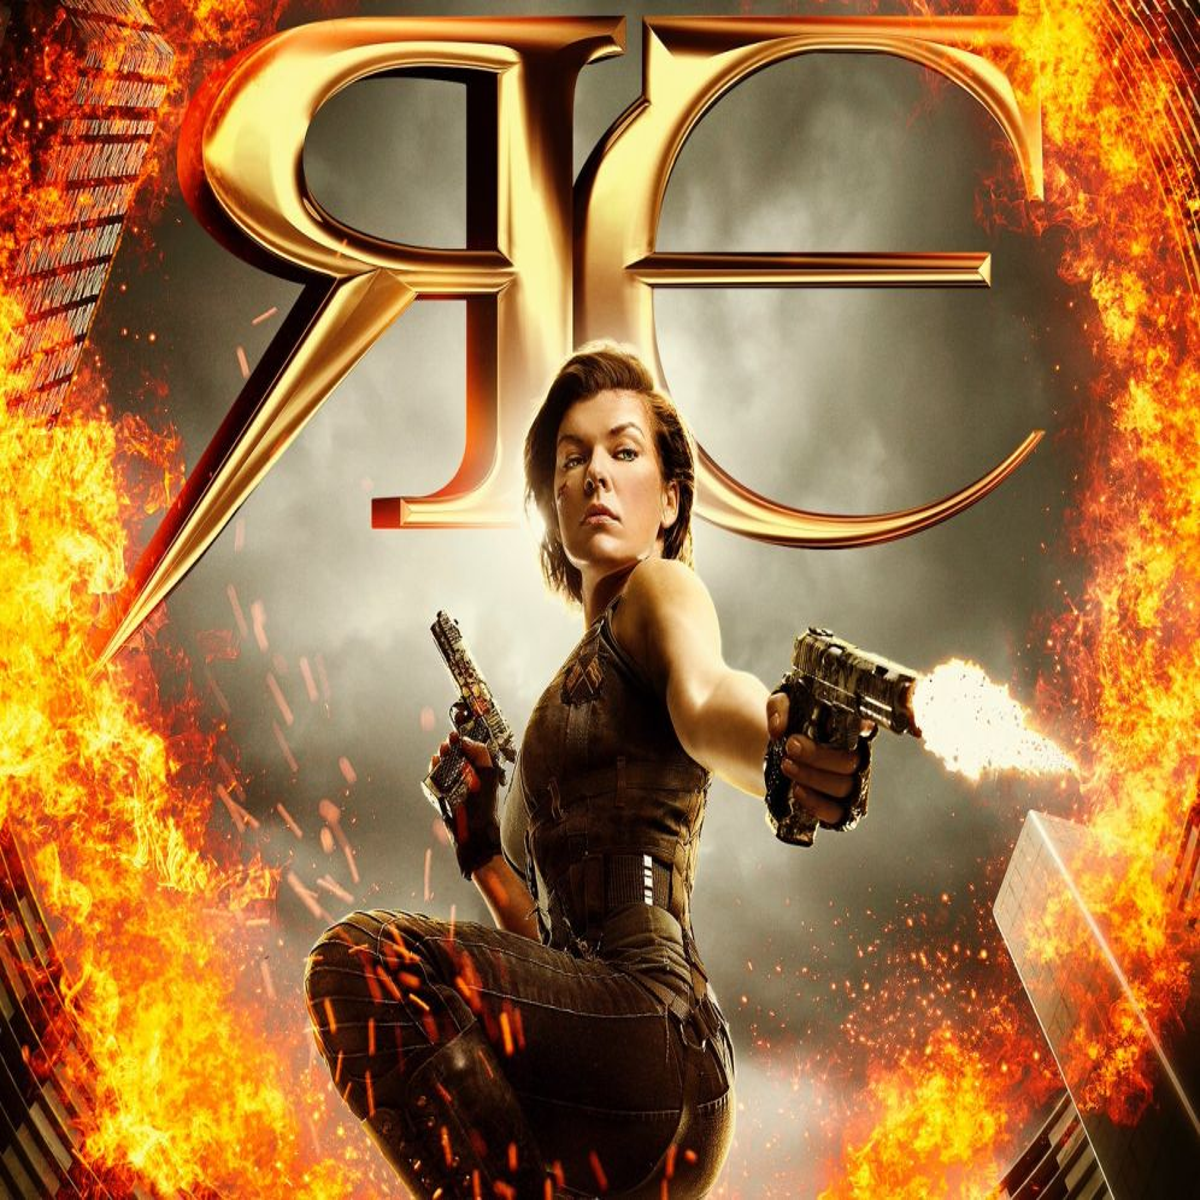 Brief Trailer Preview For Resident Evil: The Final Chapter